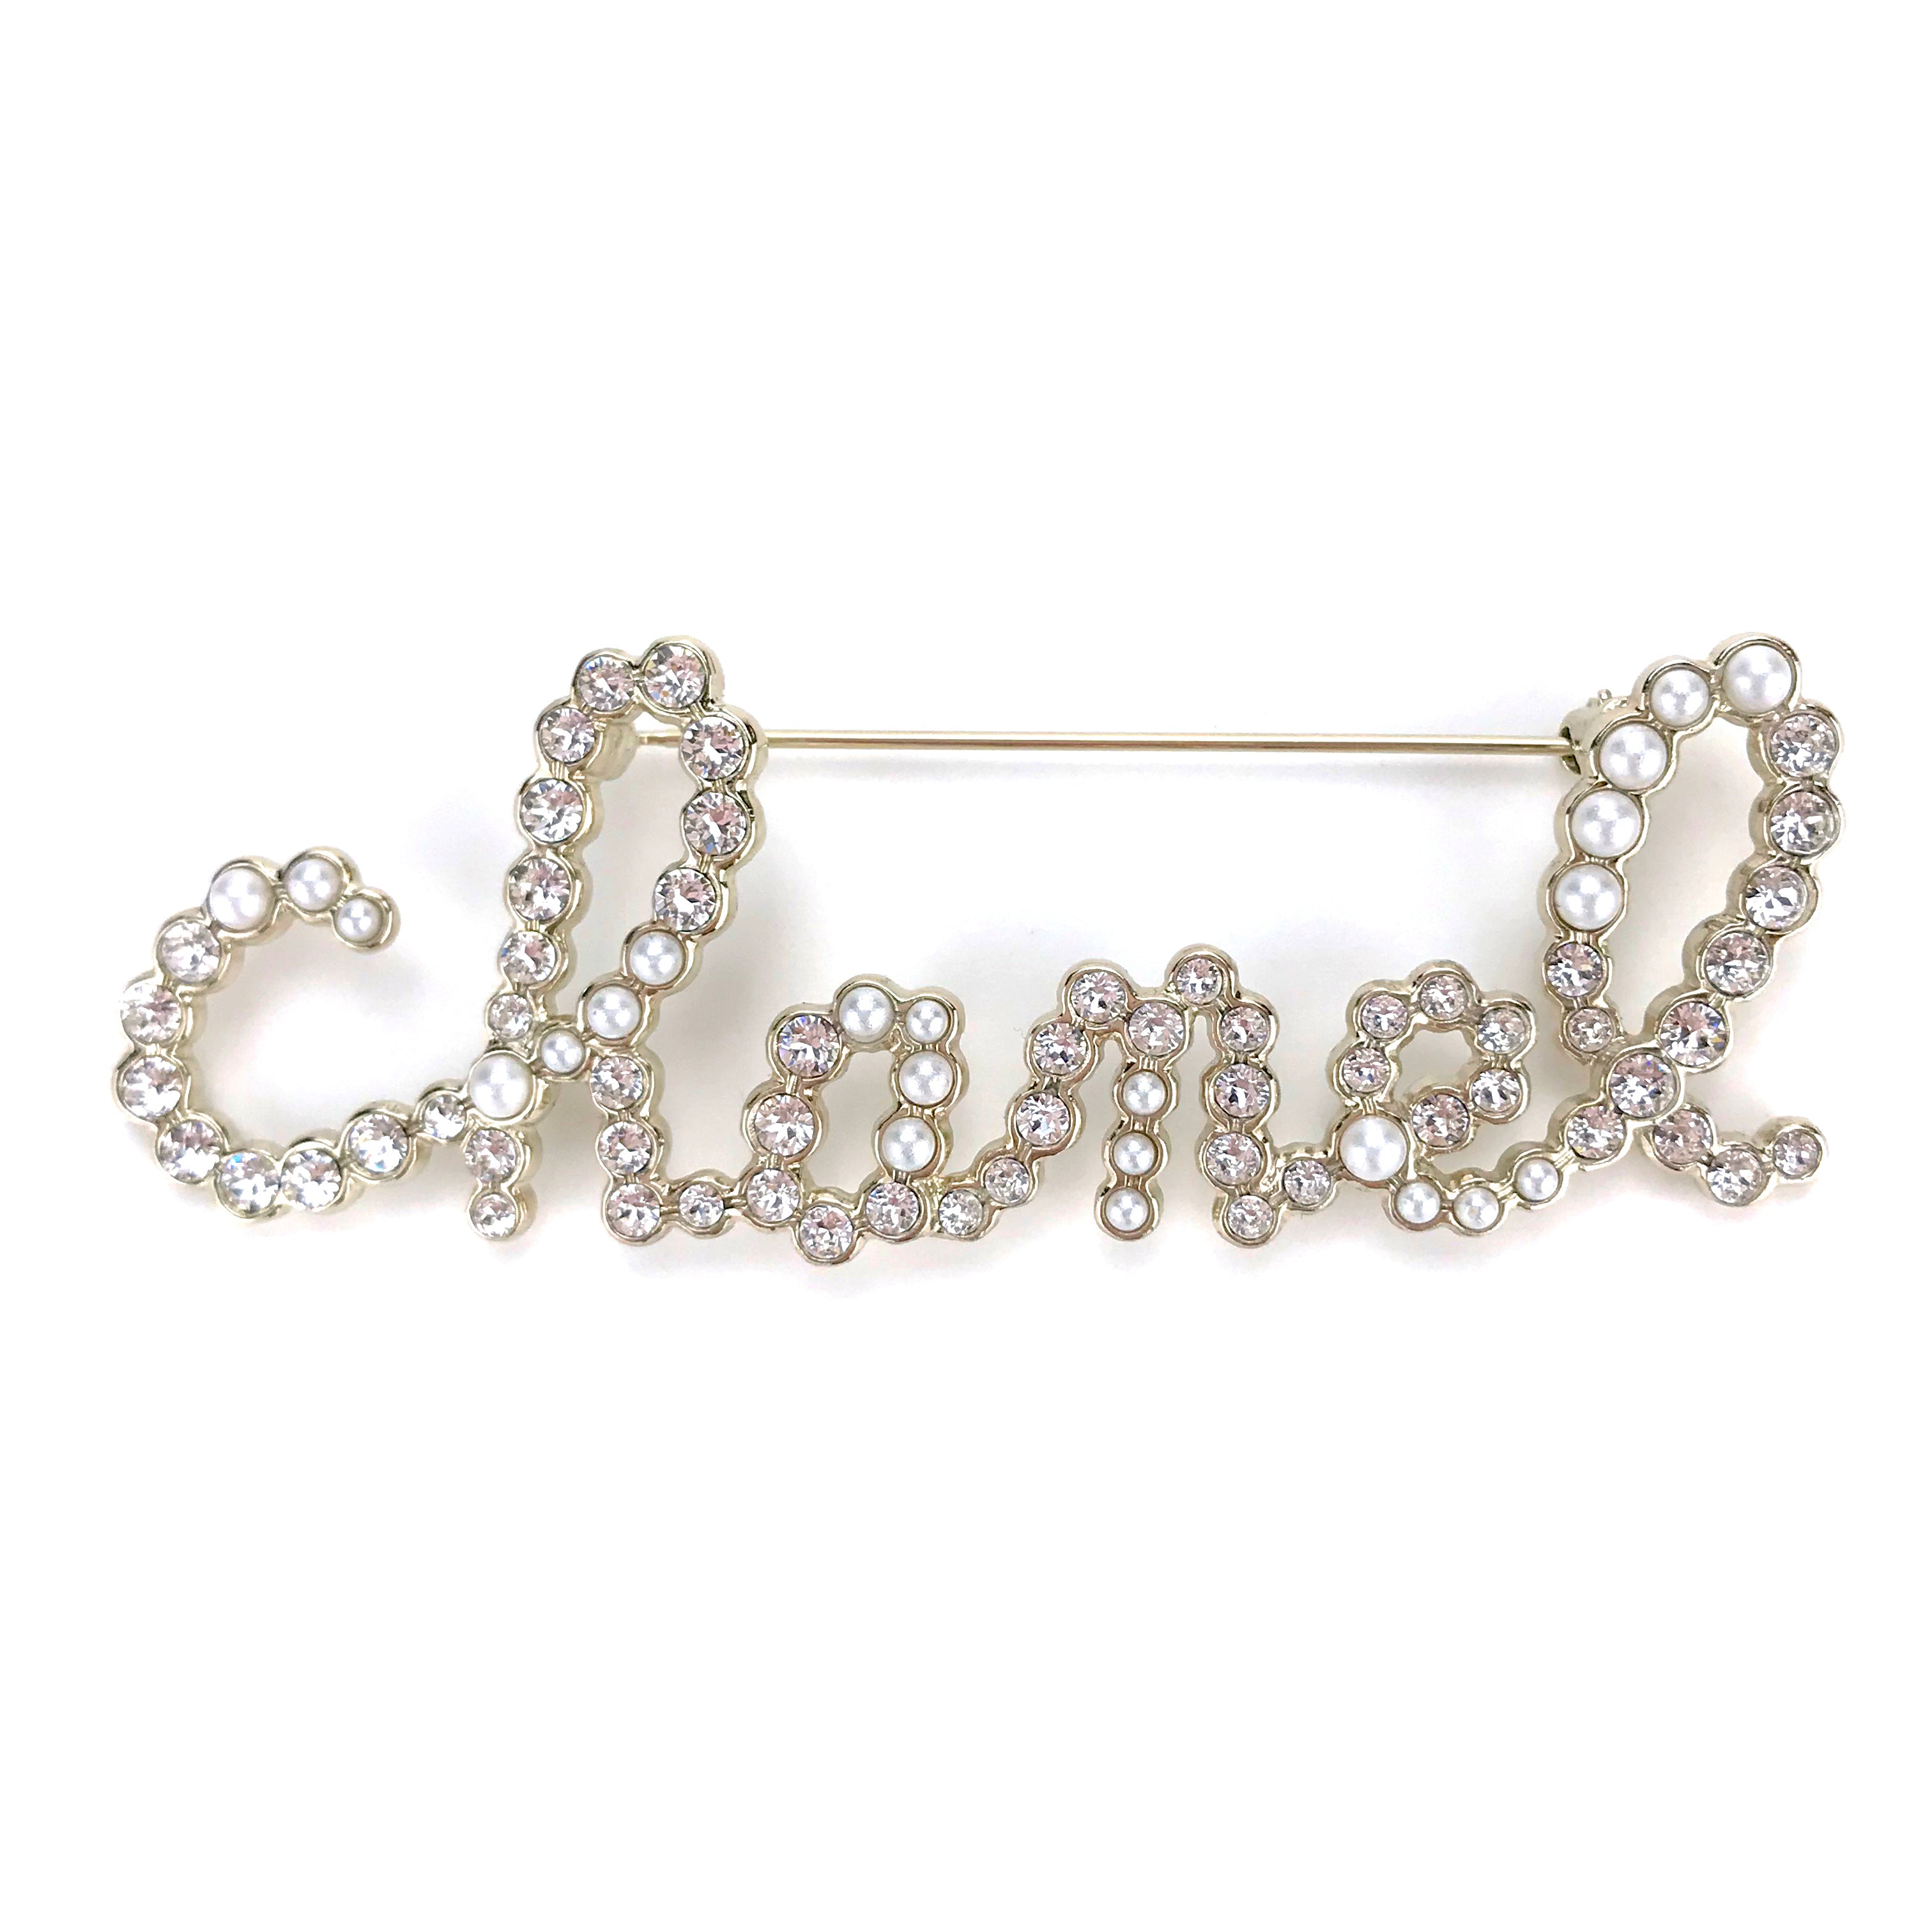 Scripted Chanel Crystal Pearl Brooch Pin